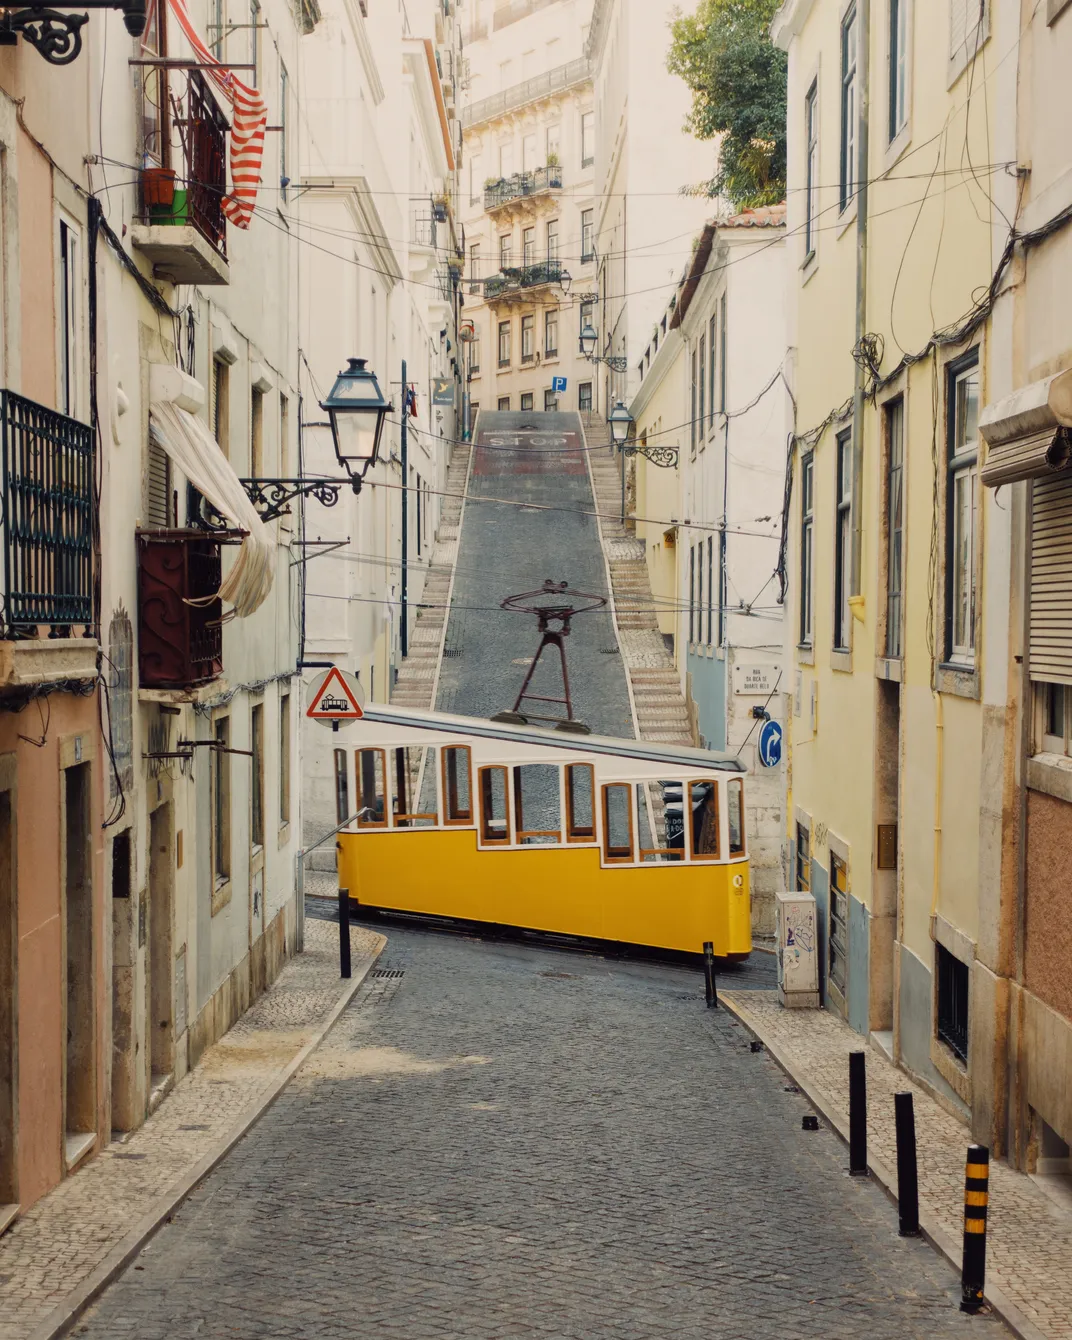 Ten Places That Could Be Straight Out of a Wes Anderson Film